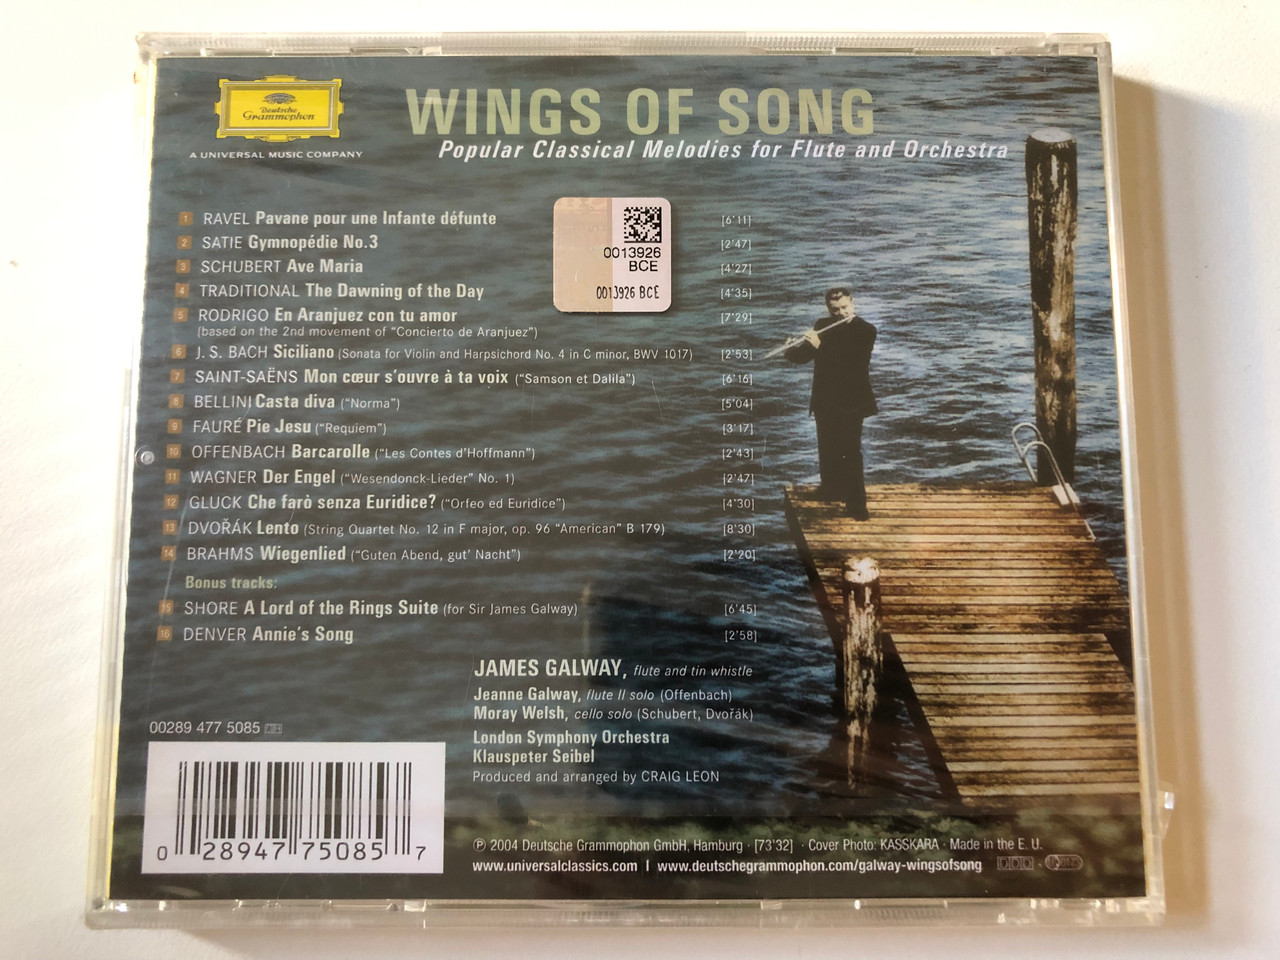 https://cdn10.bigcommerce.com/s-62bdpkt7pb/products/0/images/259026/James_Galway_Wings_Of_Song_Includes_two_bonus_tracks_world-premiere_recording_of_LORD_OF_THE_RINGS_SUITE_New_Recording_of_Annies_Song_Deutsche_Grammophon_Audio_CD_2004_Stereo_00289__27741.1668768987.1280.1280.JPG?c=2&_gl=1*1crnxdv*_ga*MjA2NTIxMjE2MC4xNTkwNTEyNTMy*_ga_WS2VZYPC6G*MTY2ODc2ODMzMC42MzUuMS4xNjY4NzY4ODIyLjExLjAuMA..